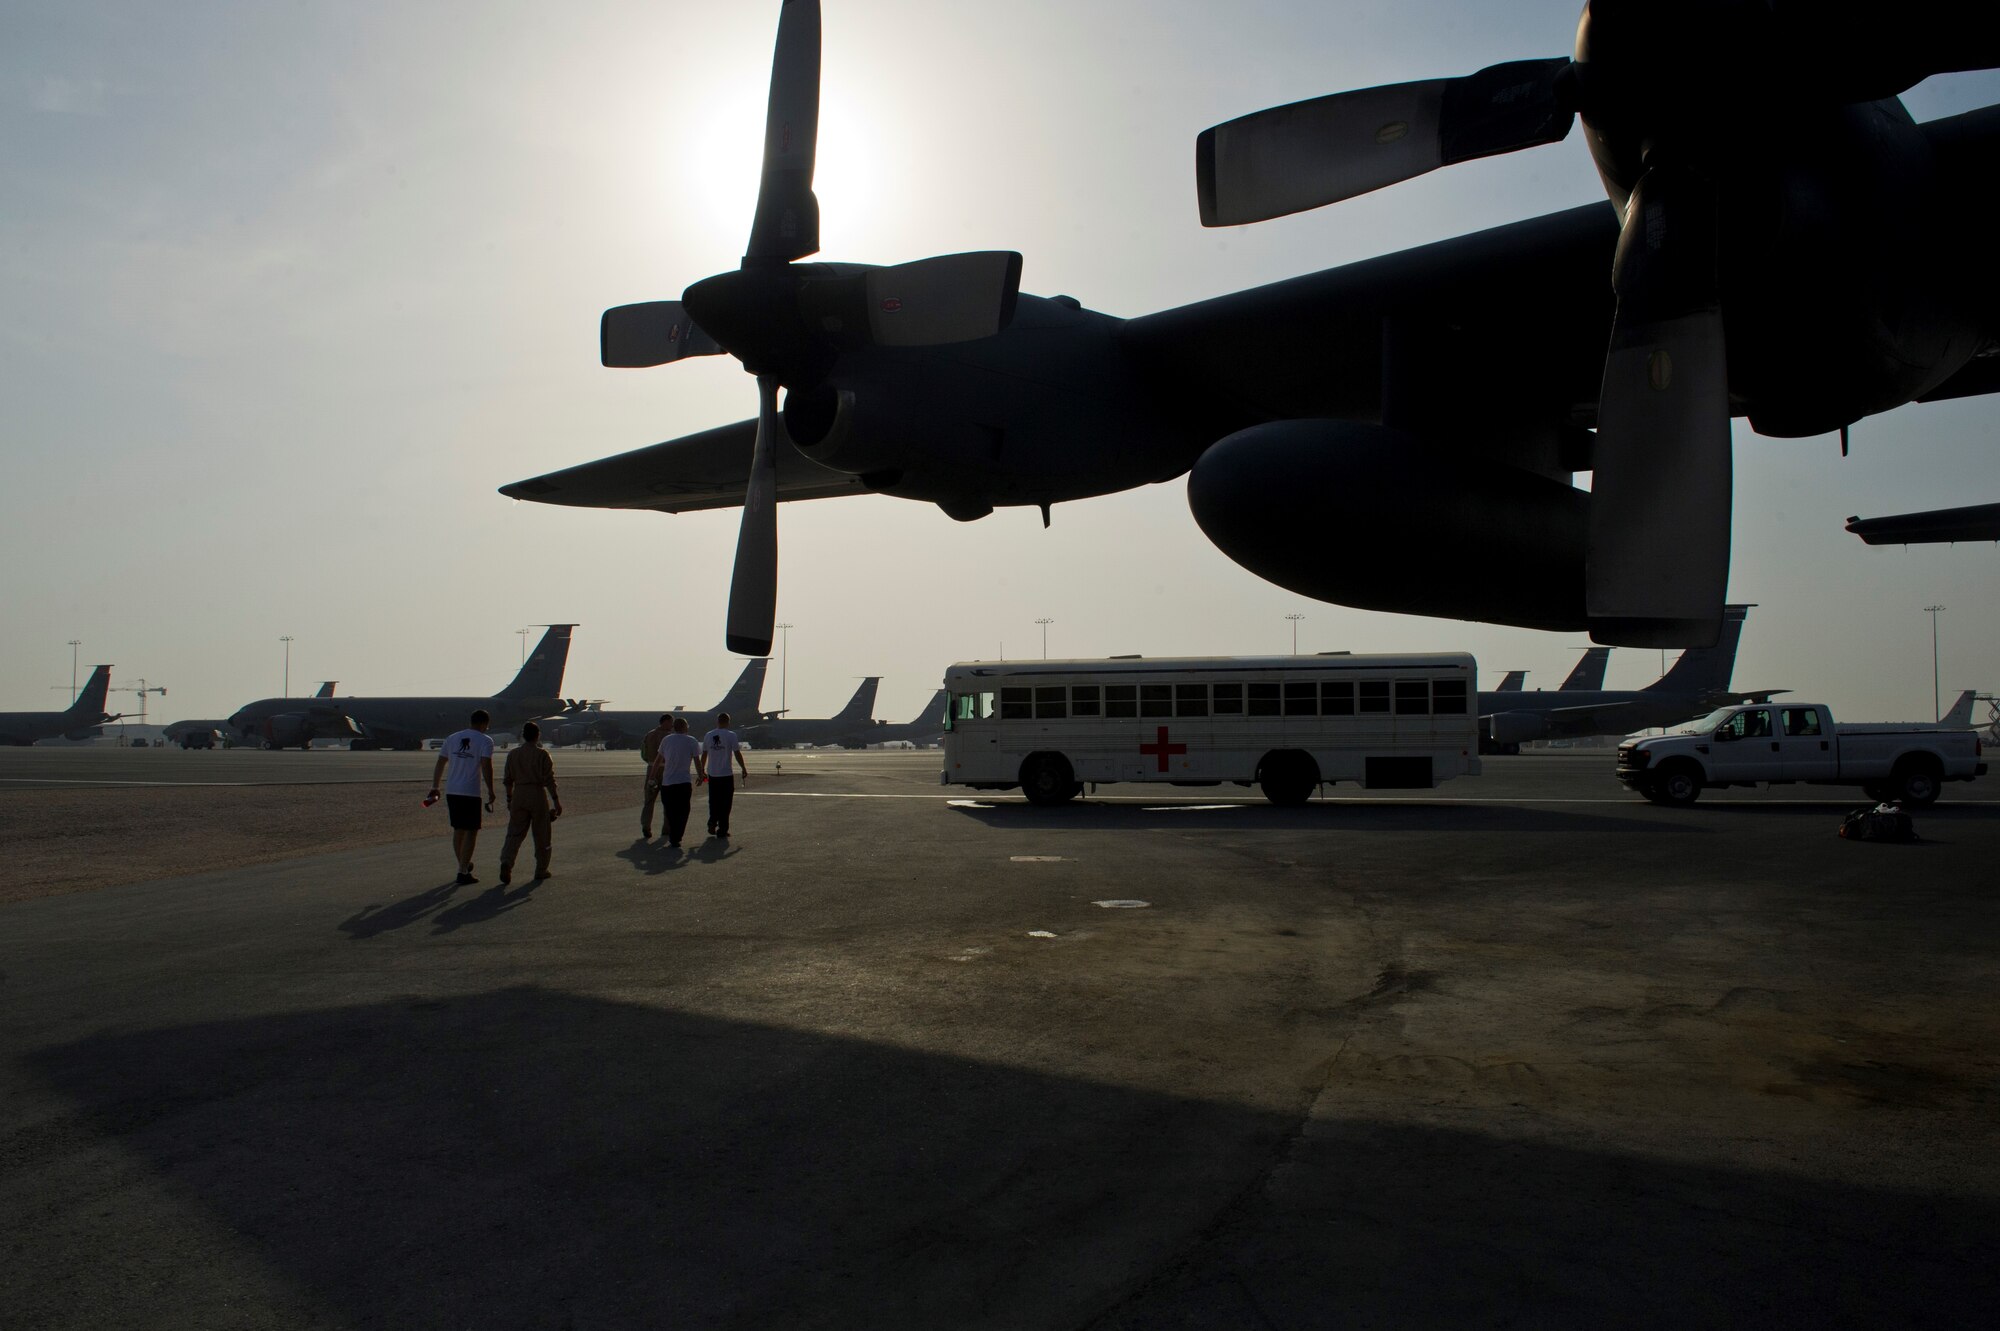 Members from the 379th Expeditionary Aeromedical Evacuation Squadron escort patients from a C-130 Hercules to a medical bus after returning from an aeromedical evacuation mission, July 20, 2013, at an undisclosed location in Southwest Asia. The EAES teams are needed to transport patients to medical facilities from remote deployed locations for additional treatment. (U.S. Air Force photo/Staff Sgt. Marleah Miller)